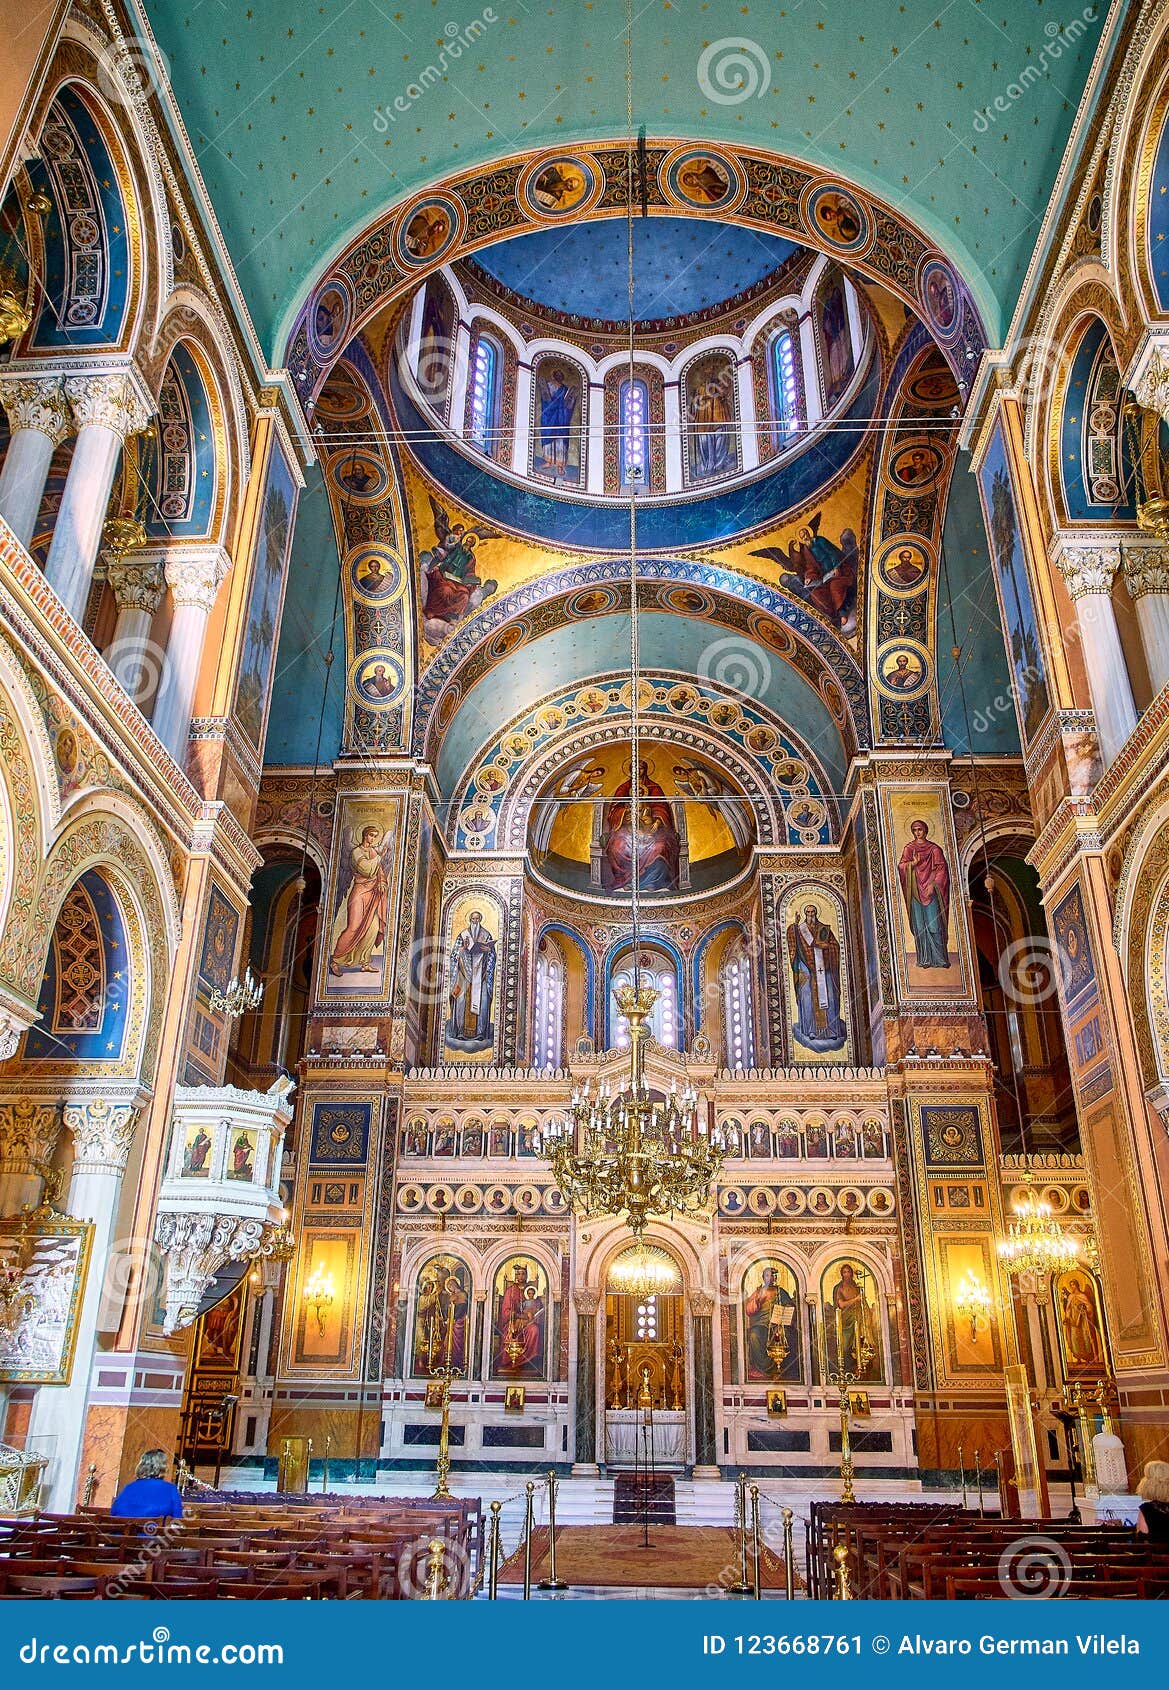 Collection 101+ Images holy metropolitan church of the annunciation to the virgin mary Sharp